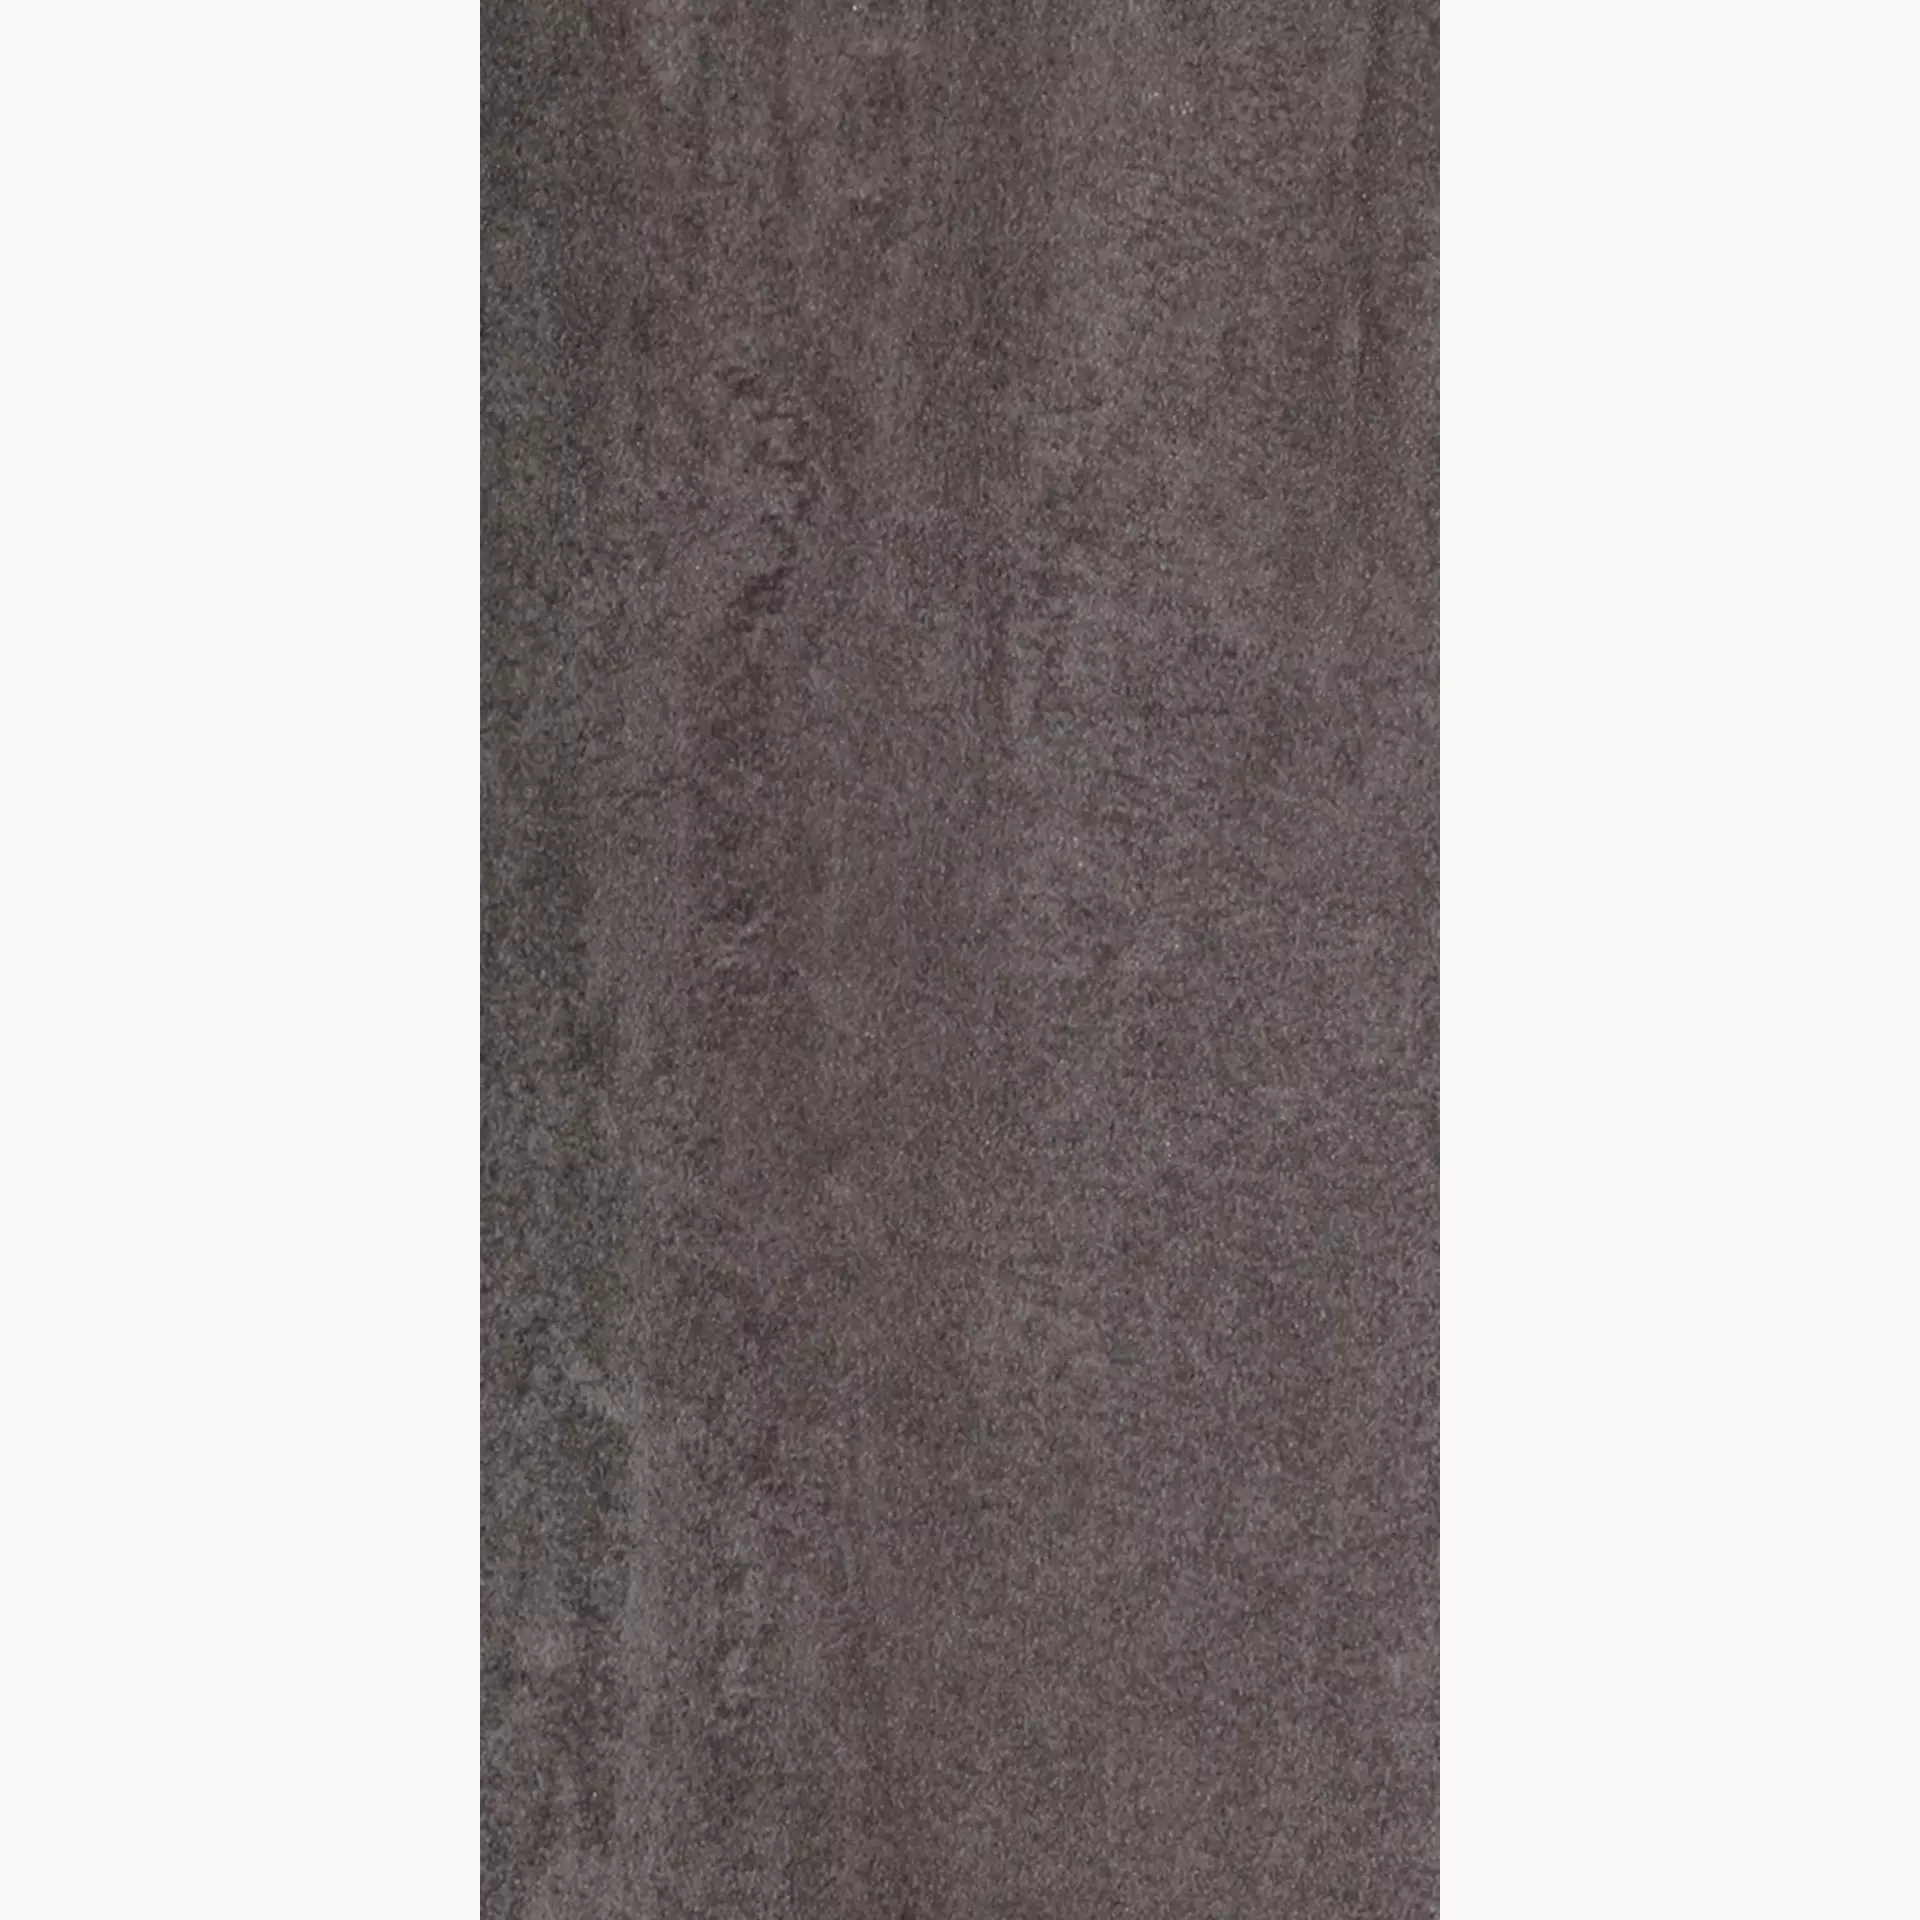 Rondine Contract Grey Lappato J83760 30x60cm rectified 9,5mm